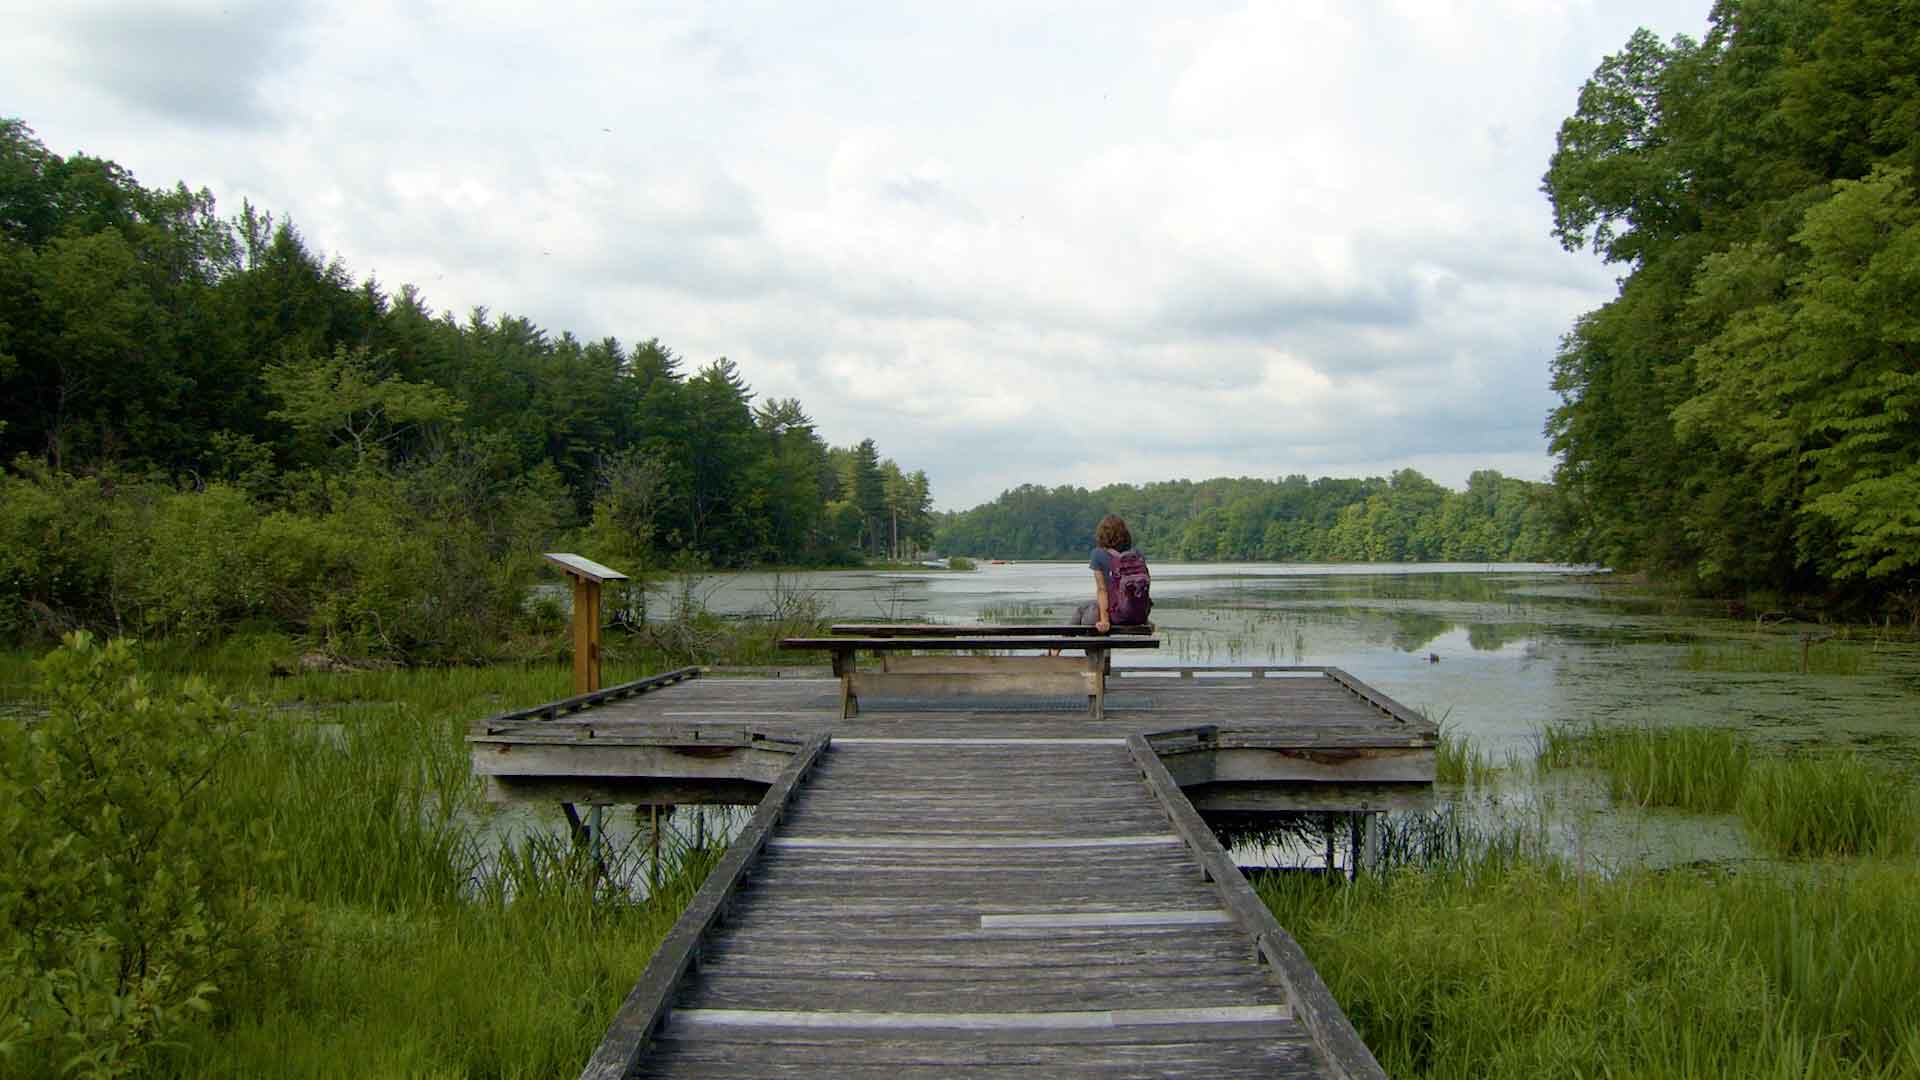 view of the lake at Shavers Creek from the boardwalk trail